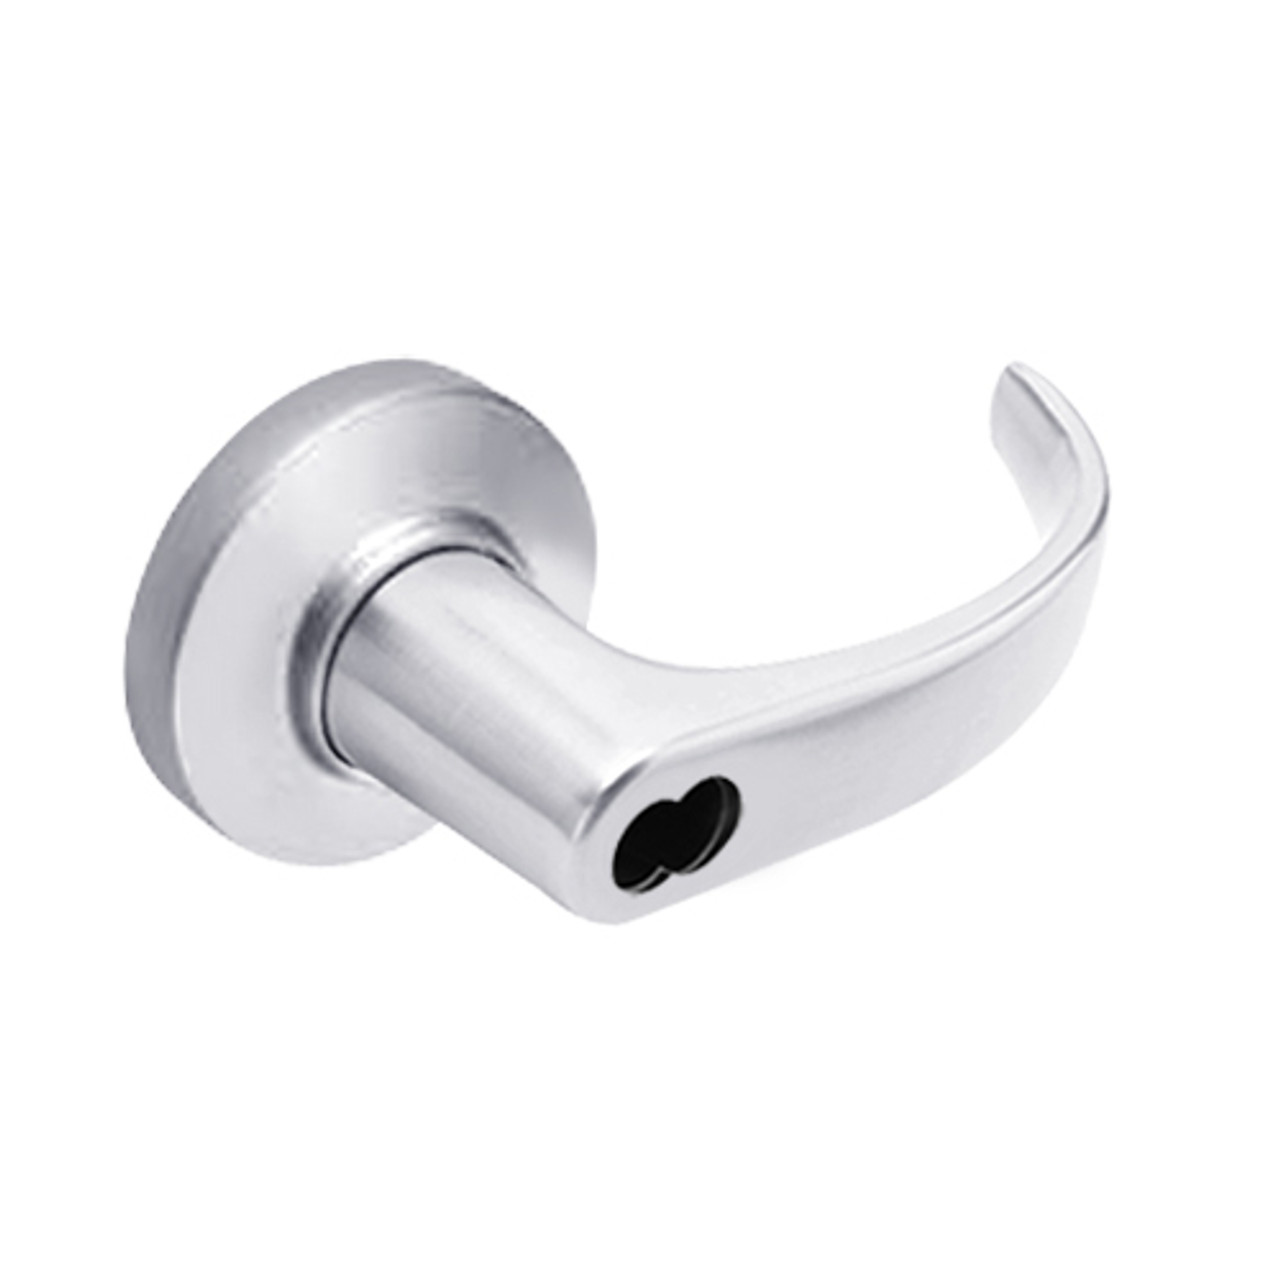 9K47EA14CSTK625 Best 9K Series Entrance or Office Cylindrical Lever Locks with Curved with Return Lever Design Accept 7 Pin Best Core in Bright Chrome